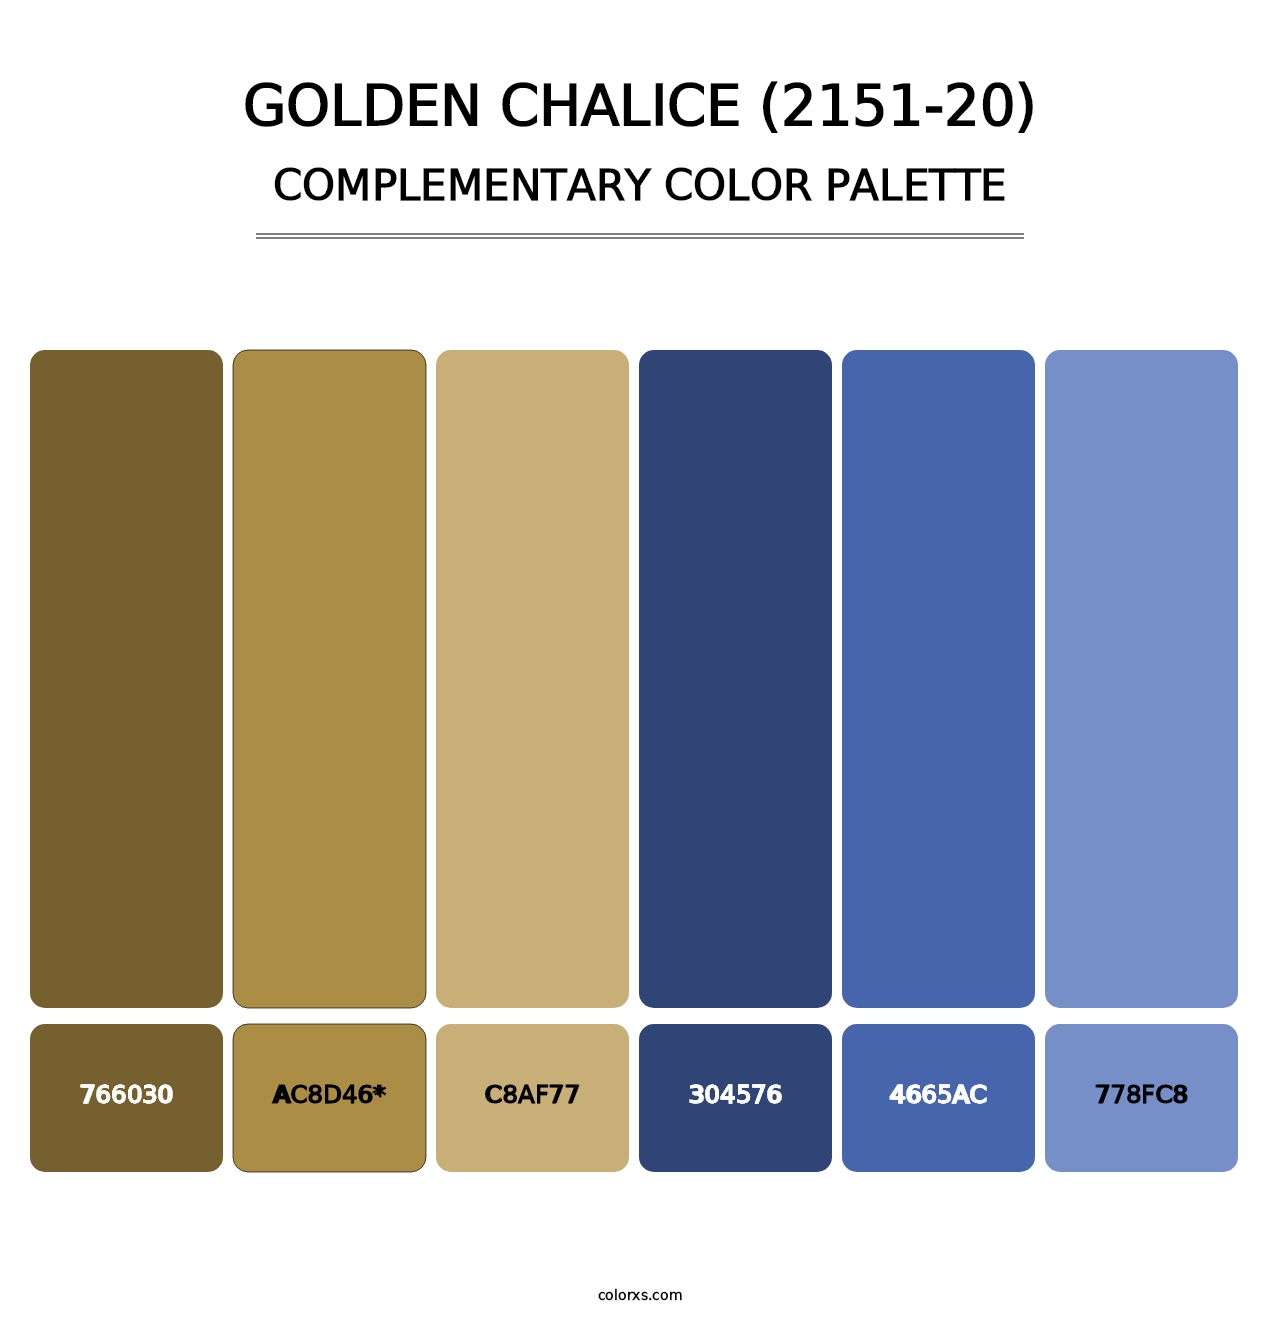 Golden Chalice (2151-20) - Complementary Color Palette